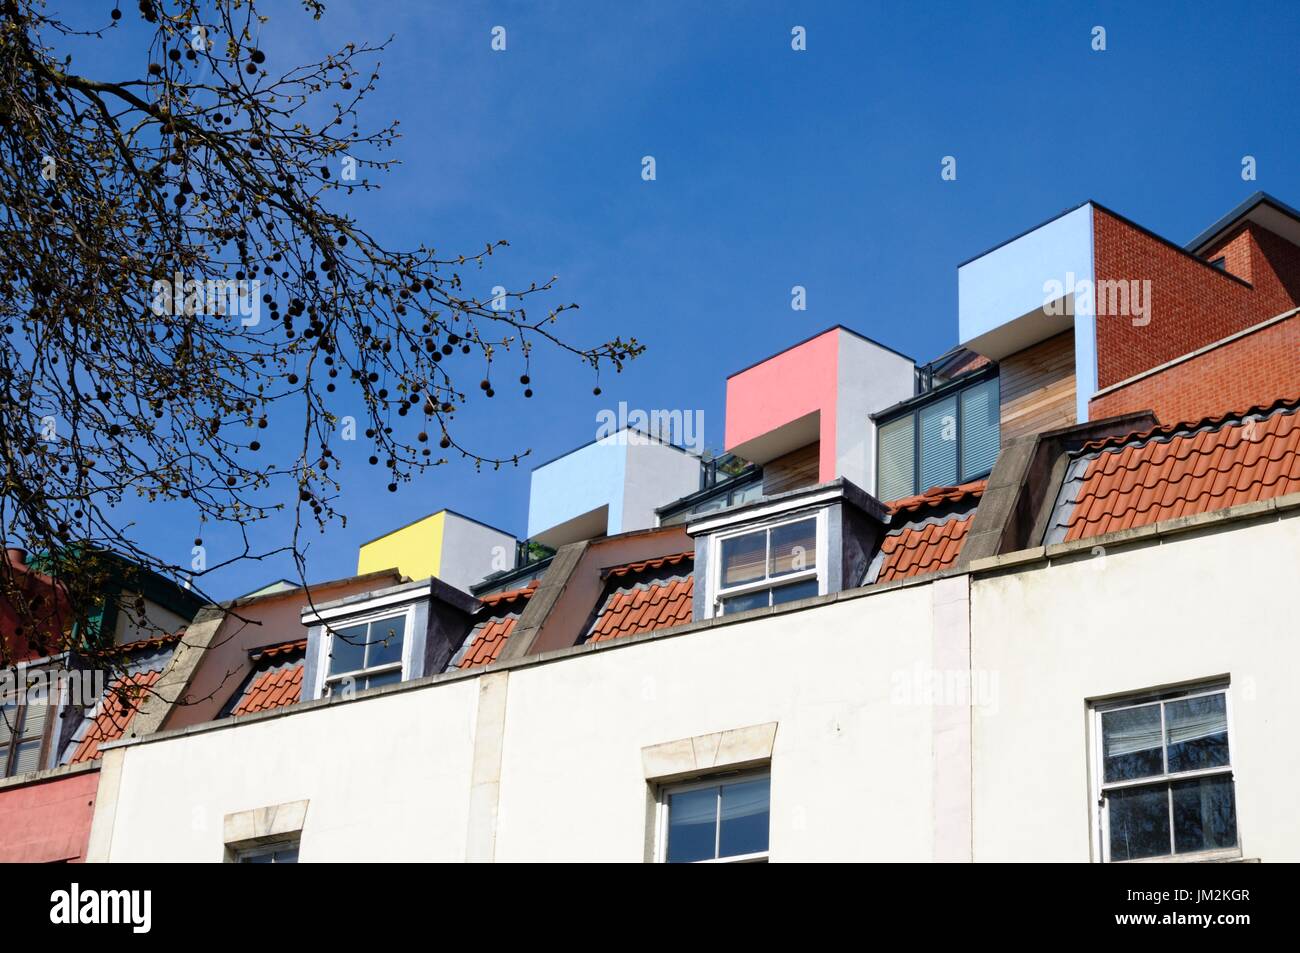 Abstract view of rooftops of Victorian or Edwardian terraced houses juxtaposed with modern terraced housing rising above from behind Stock Photo